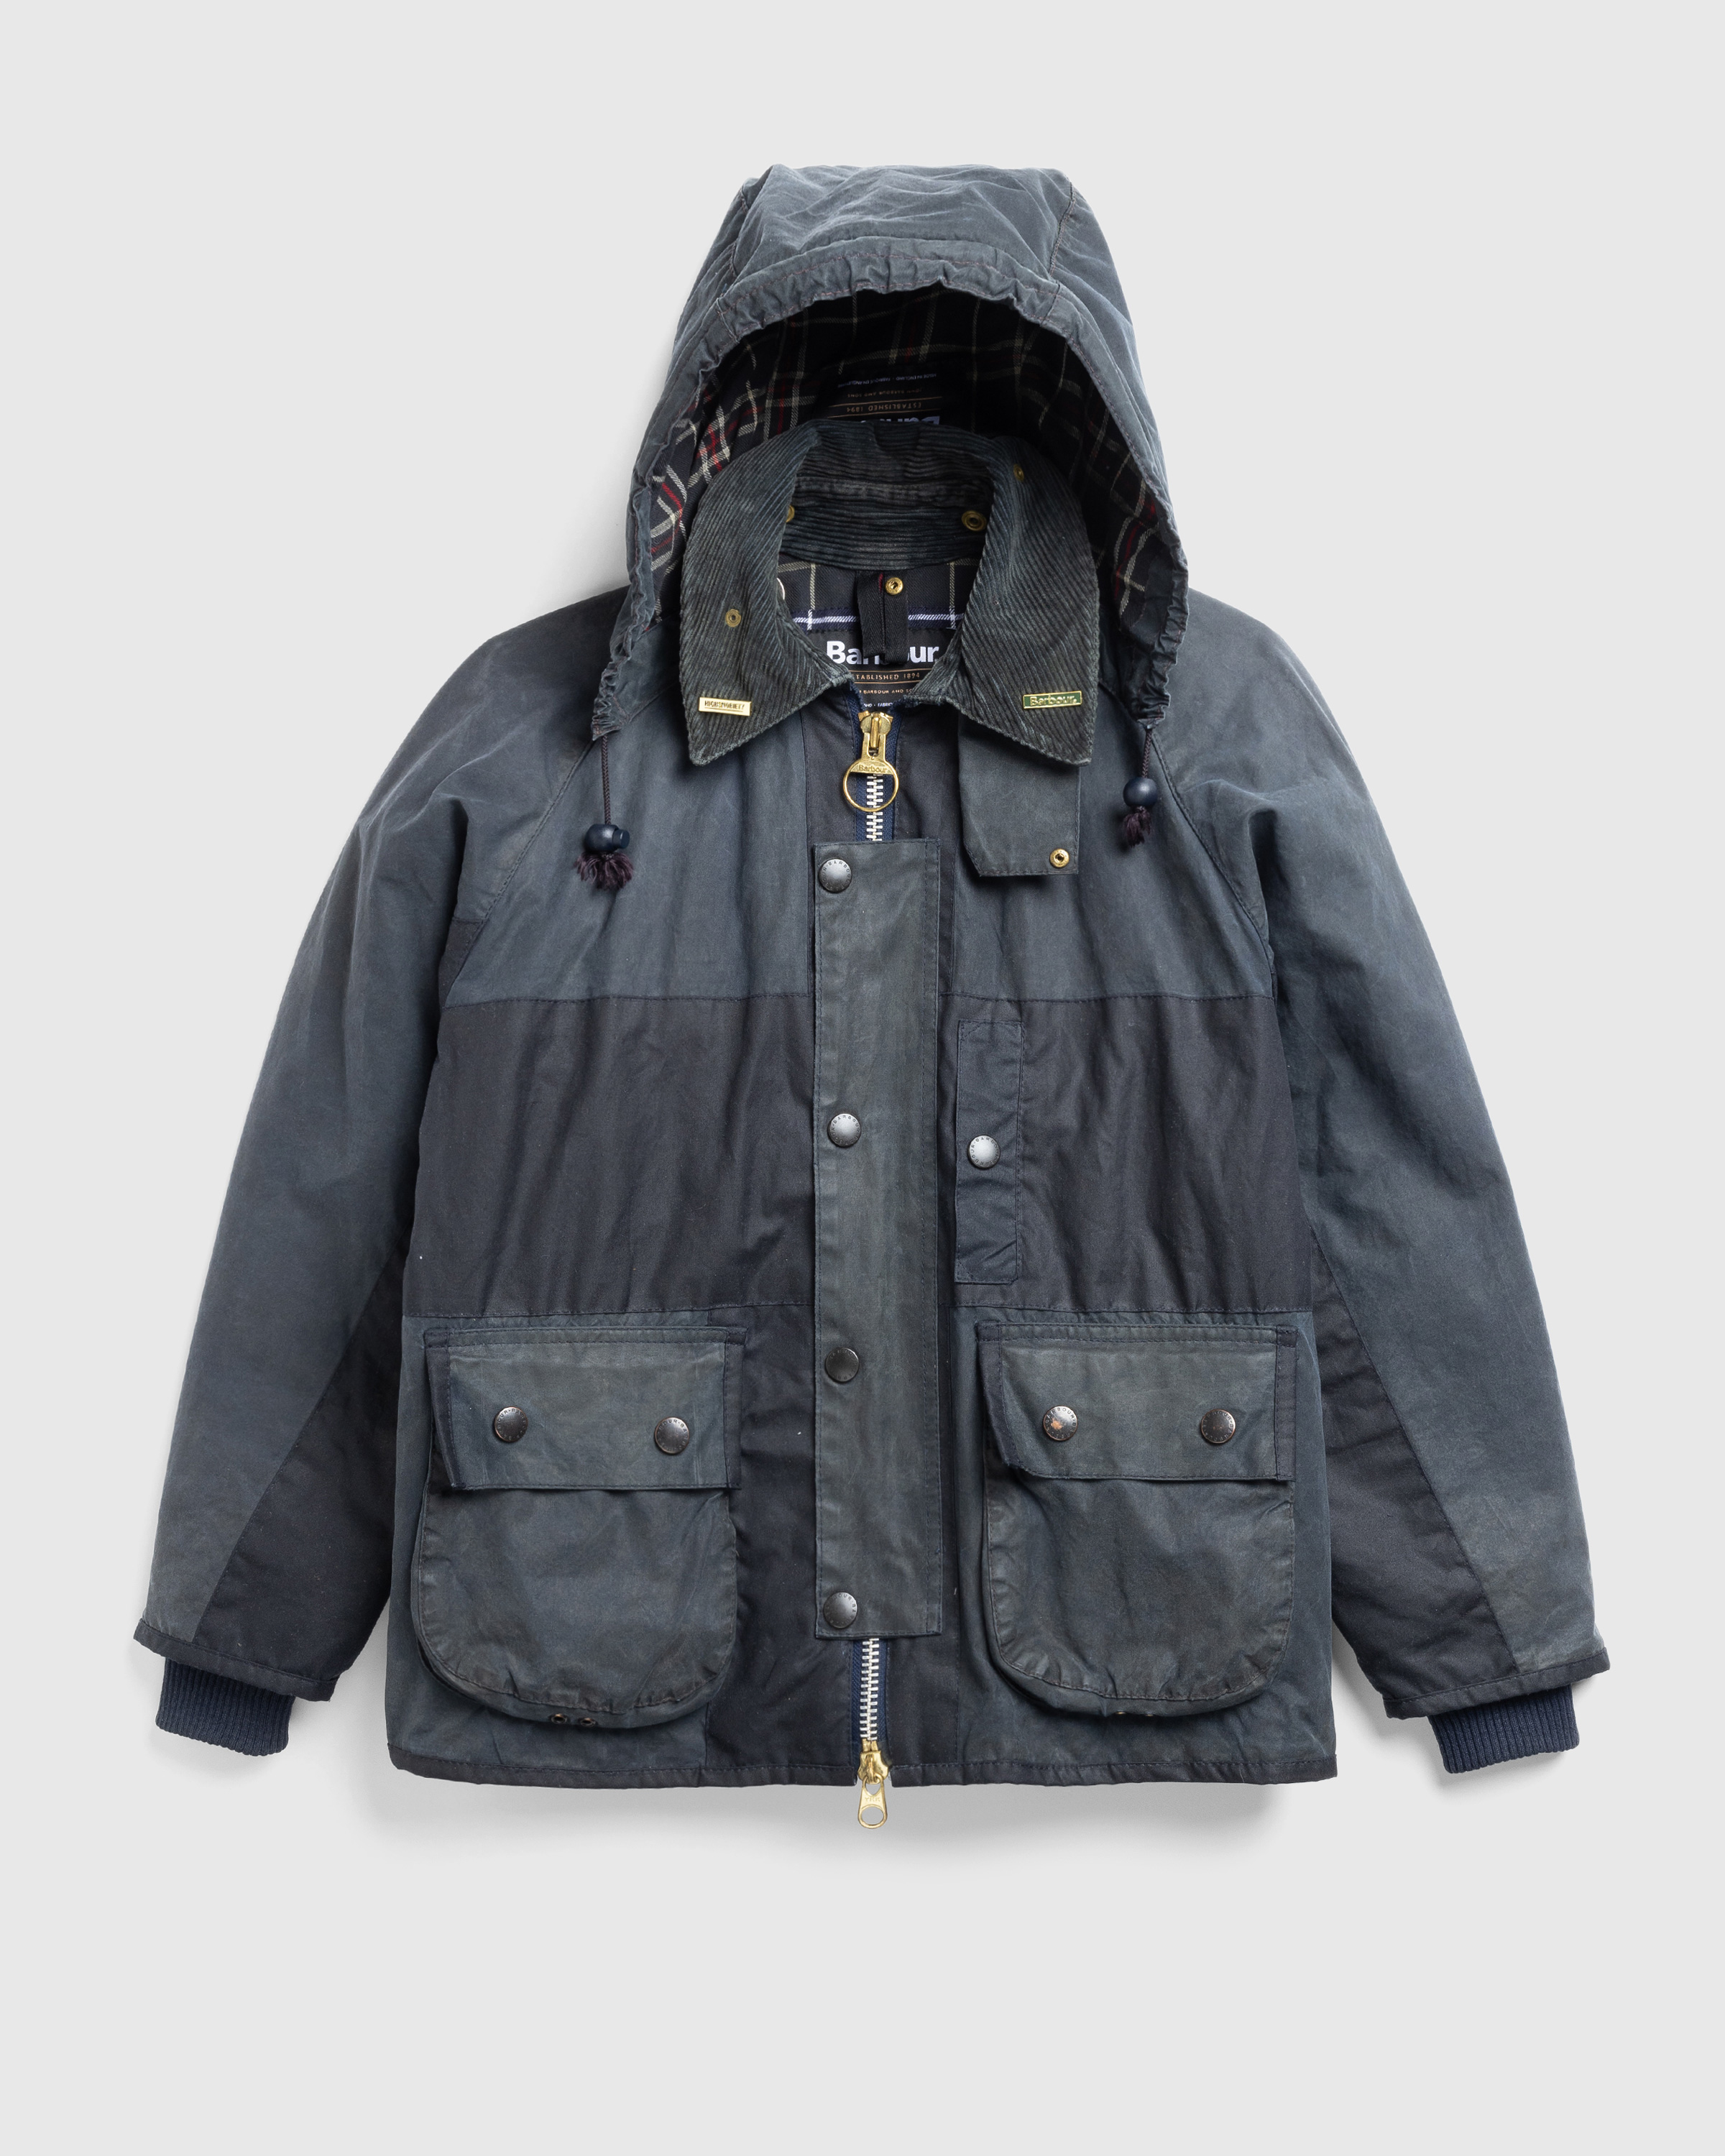 not in london highsnobiety barbour jacket